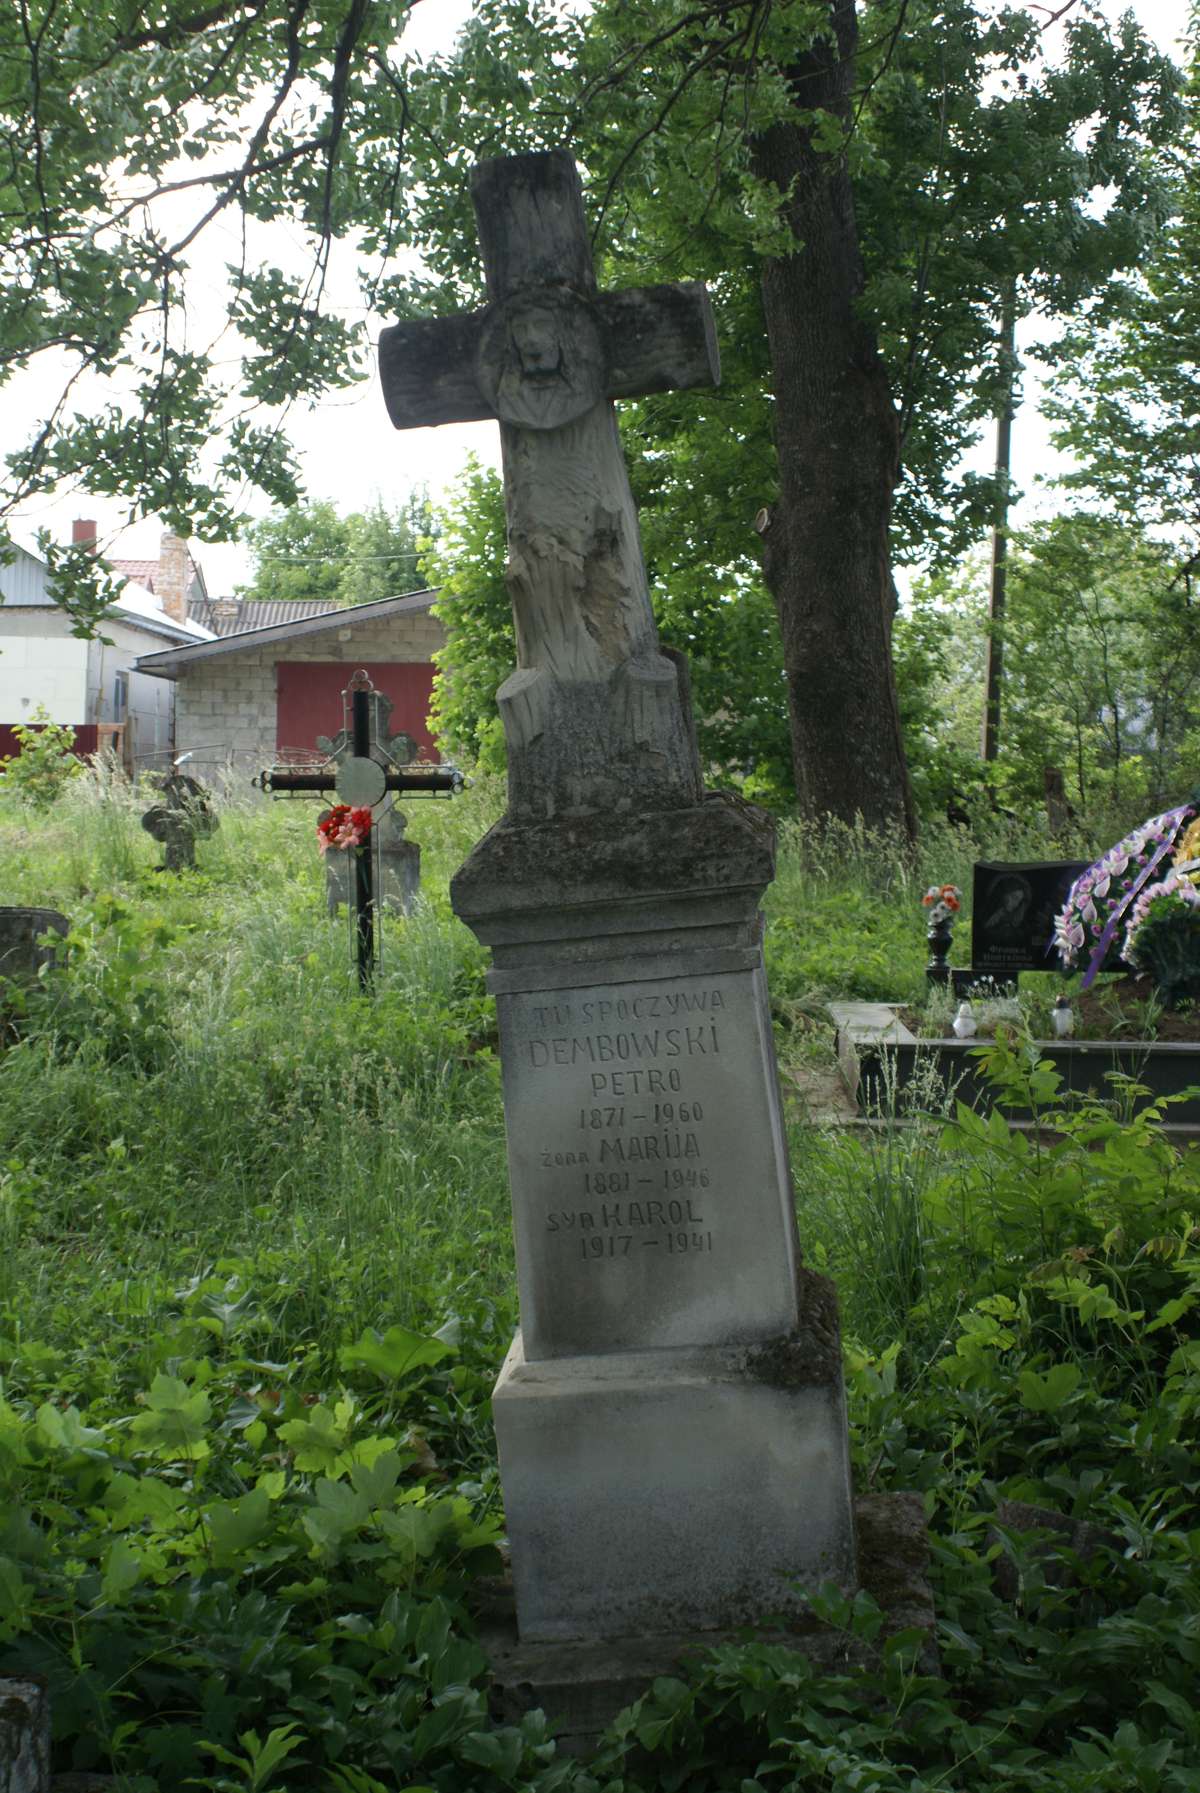 Tombstone of the Dembowski family, Zbarazh cemetery, state of 2018